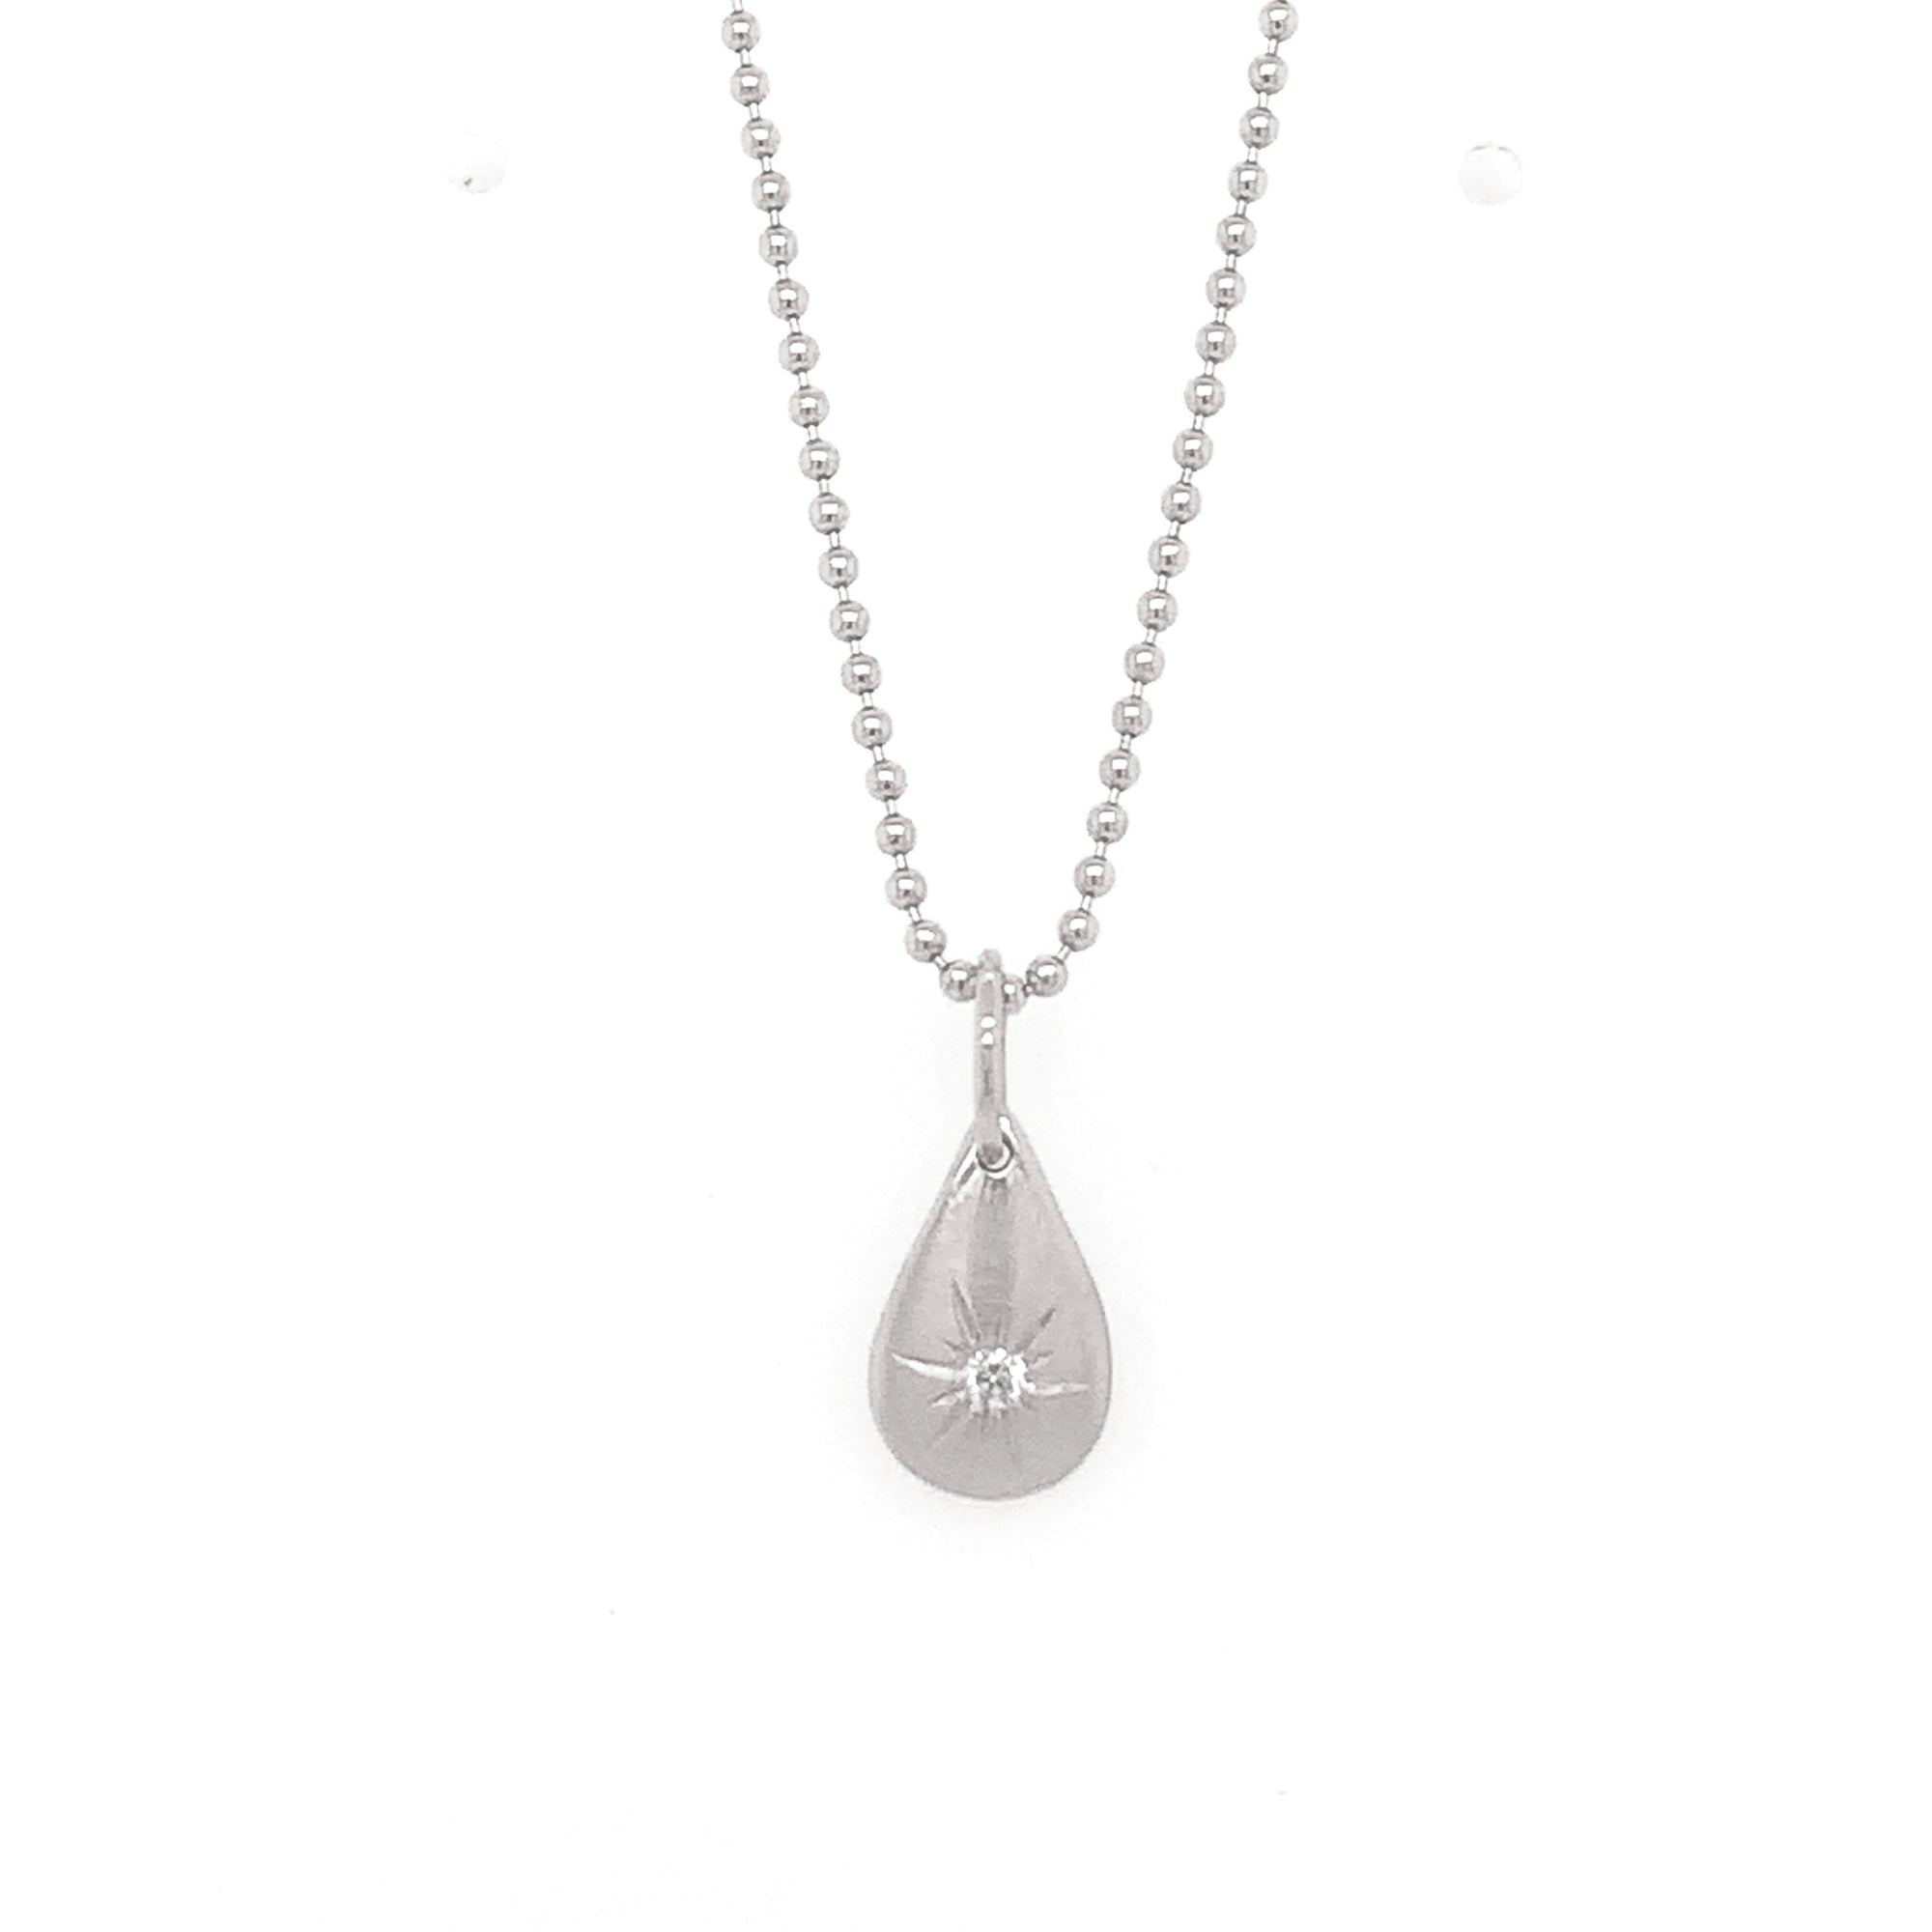 14k white gold baby JONG teardrop charm with white diamond with hand etching